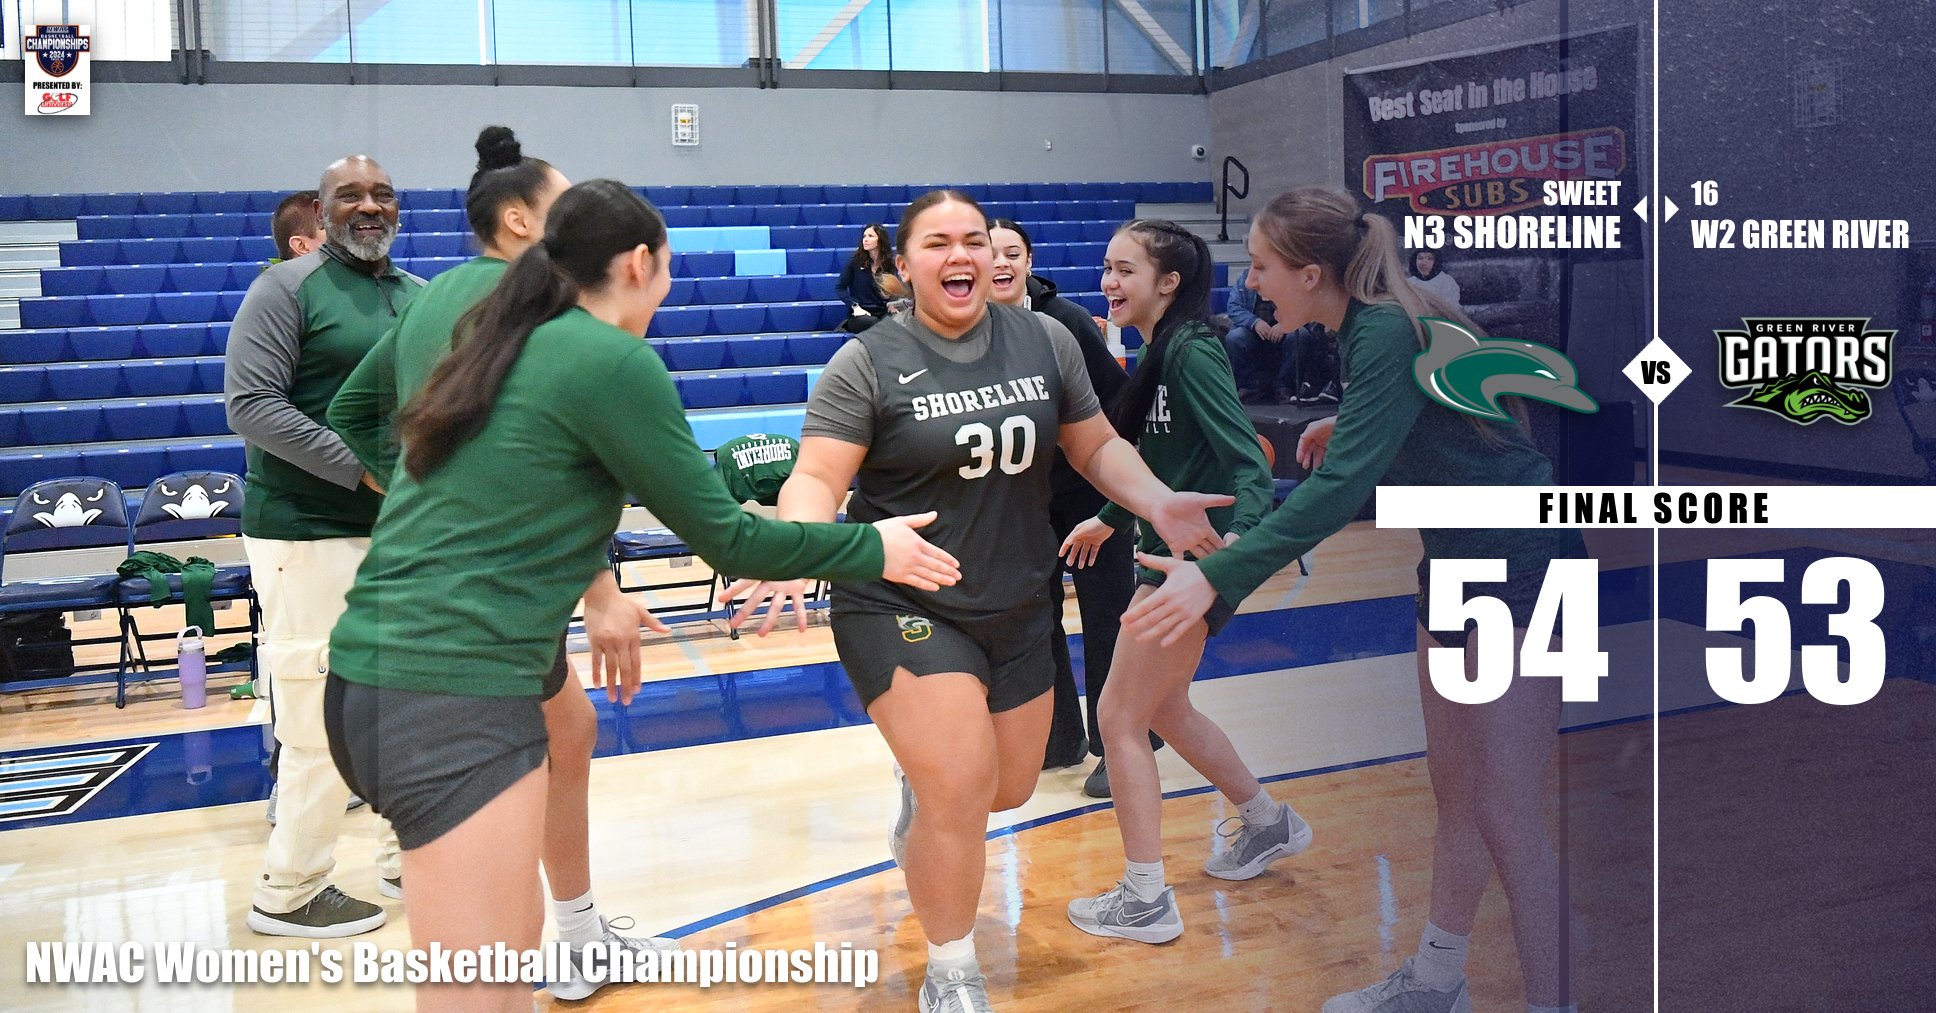 Dolphins Hold Off Gators Late 54-53 to Advance to NWAC Elite 8